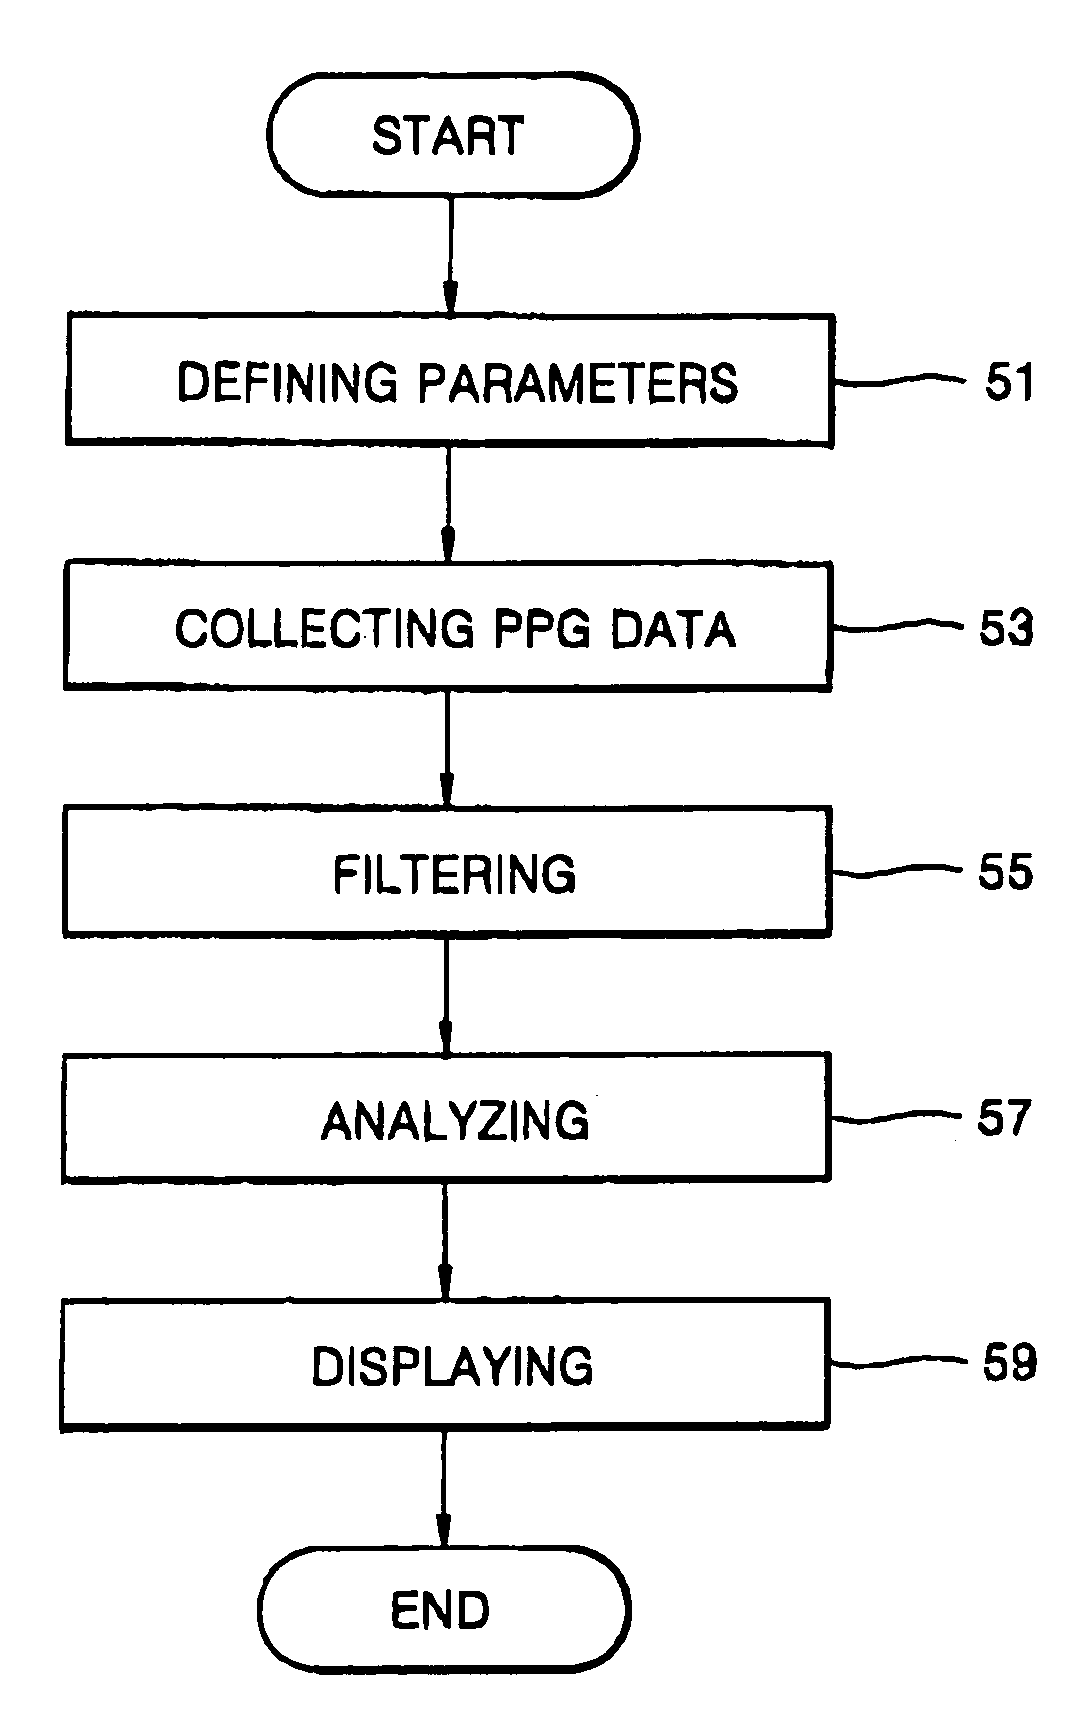 Method and apparatus for evaluating human stress using photoplethysmography